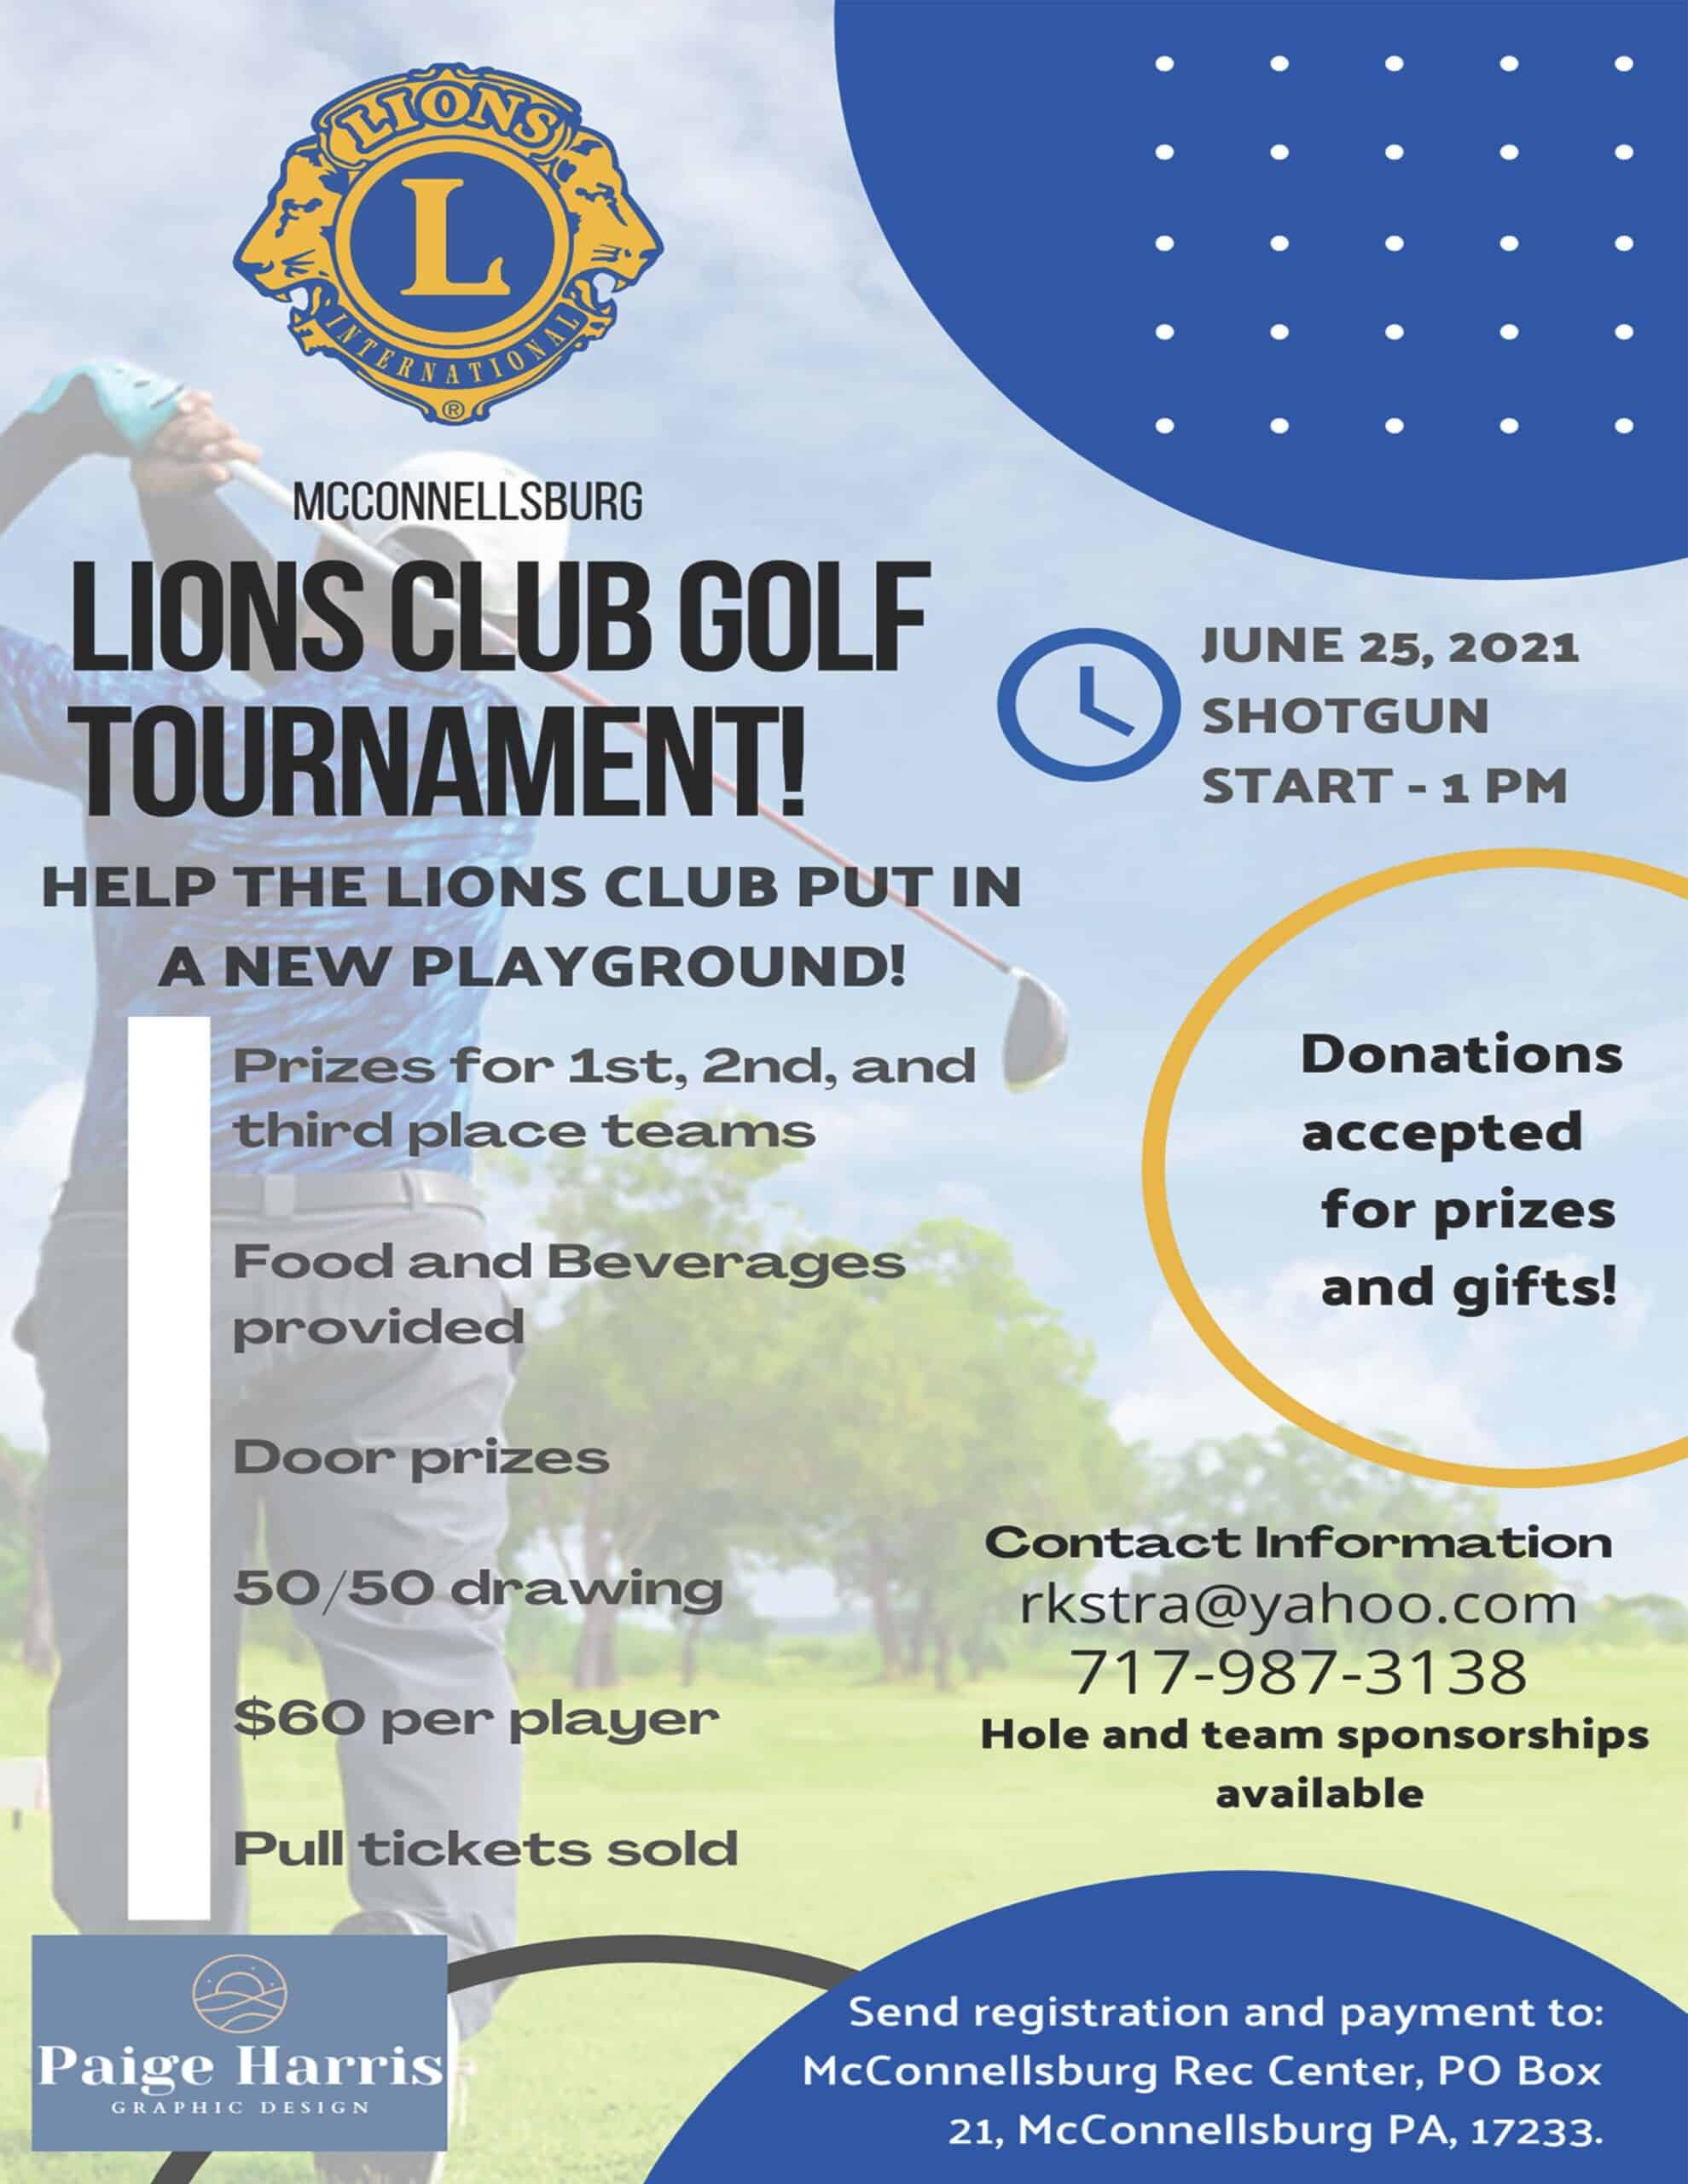 McConnellsburg Lions Club Golf Tournament Fulton County Chamber of